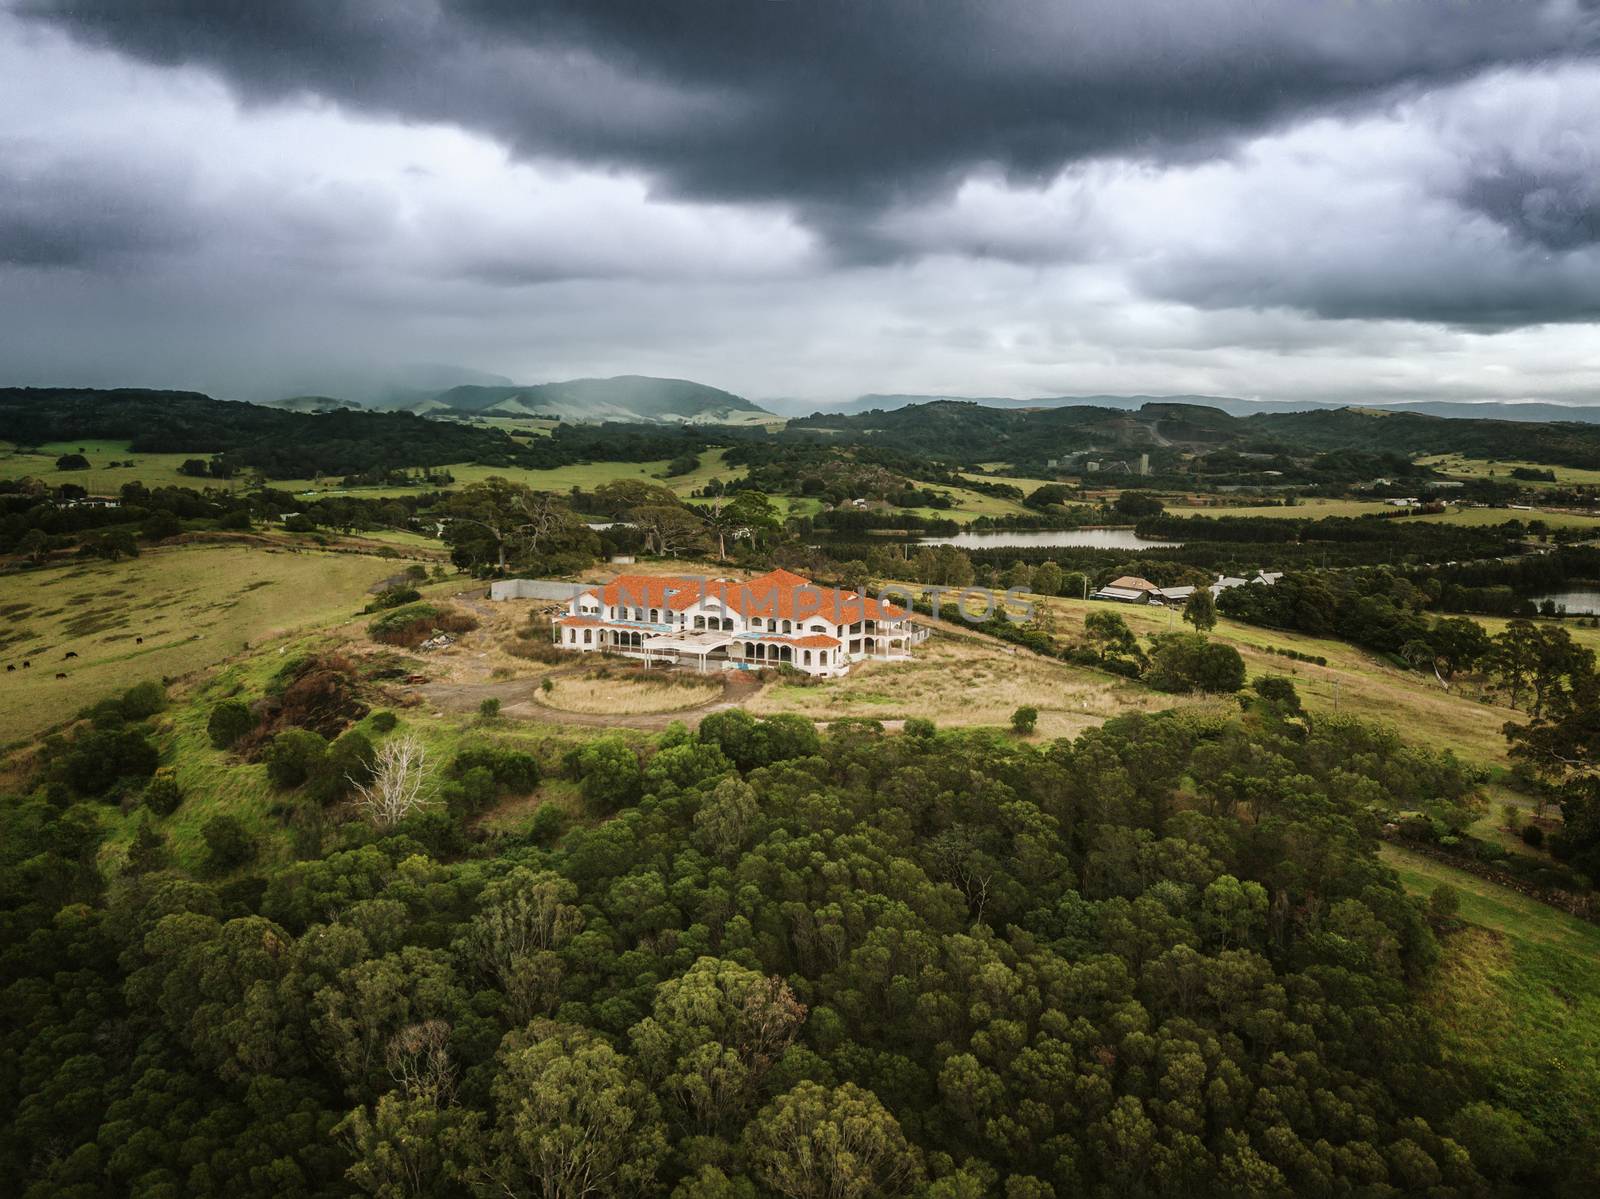 Storm clouds loom heavy over an abandoned mansion that now sits derelect in rural countryside